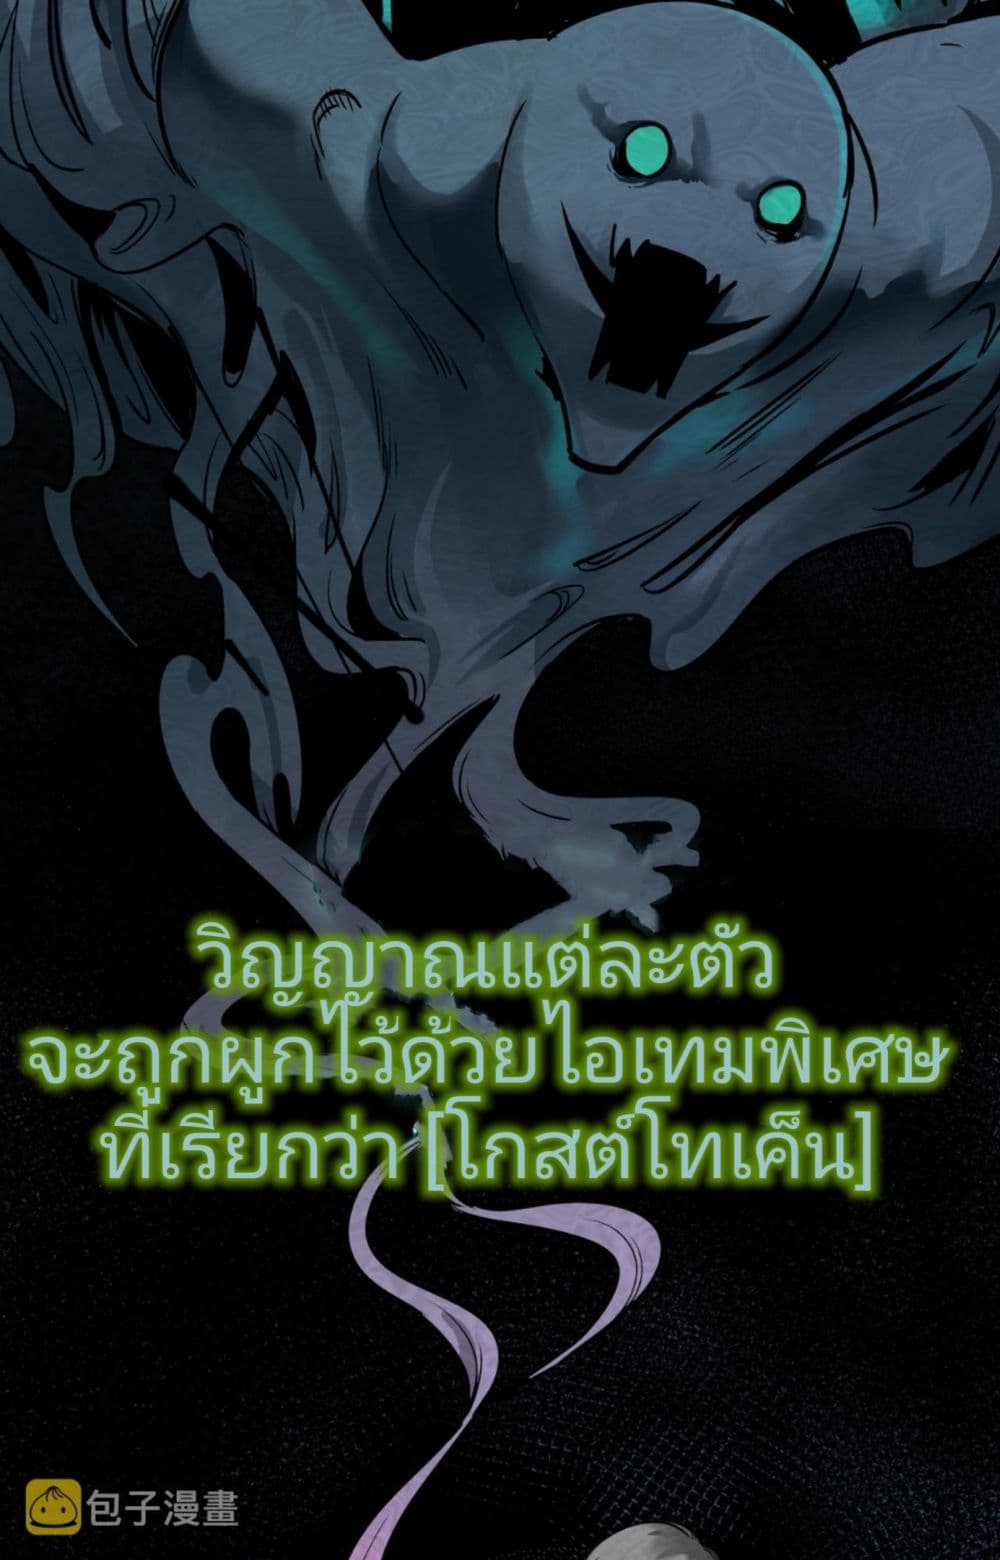 The Age of Ghost Spirits à¸à¸­à¸à¸à¸µà¹ 1 (6)